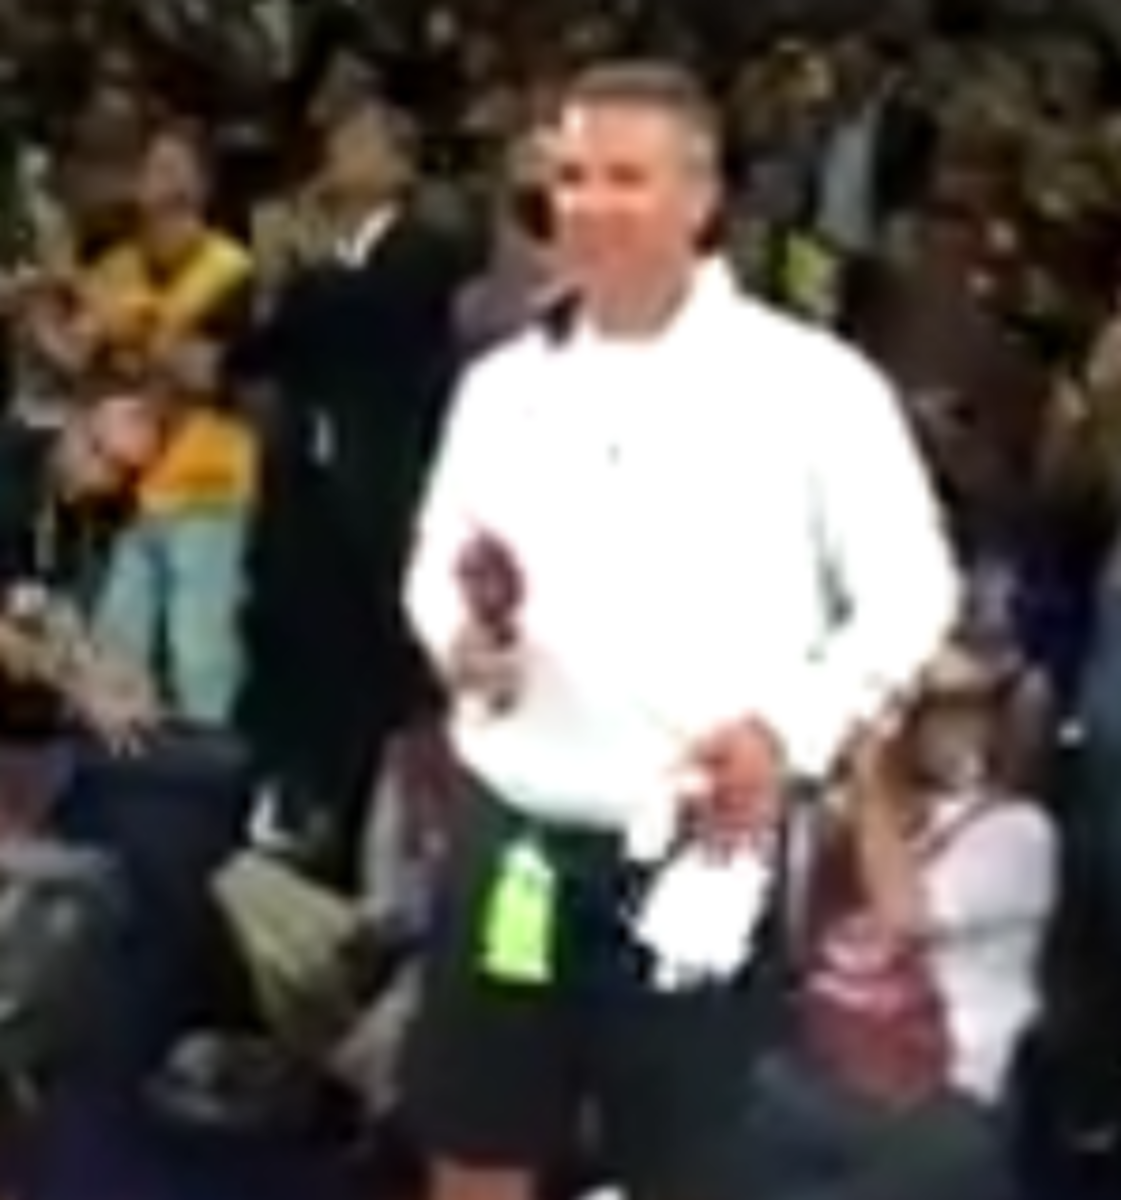 Urban Meyer leads an O-H-I-O chant at the cavs game.